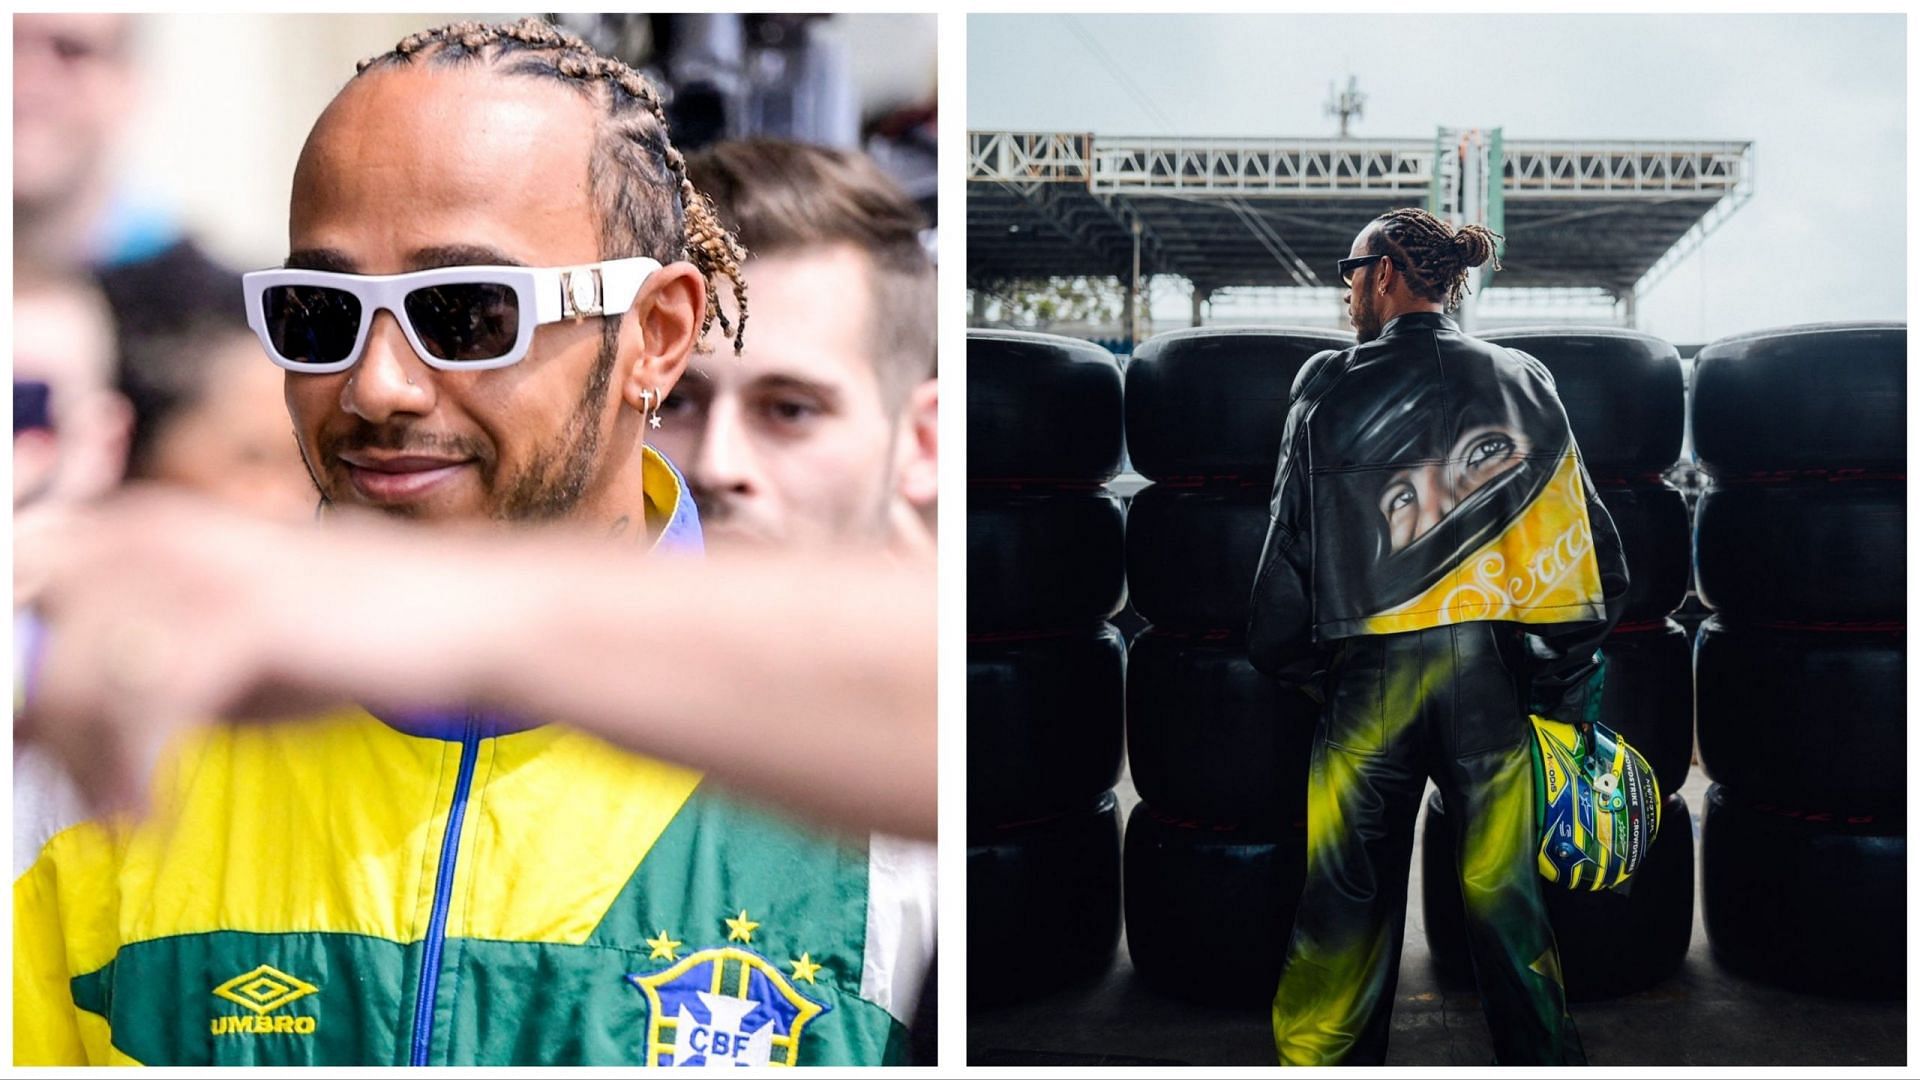 Fans amazed as Lewis Hamilton enters the Paddock in a 90